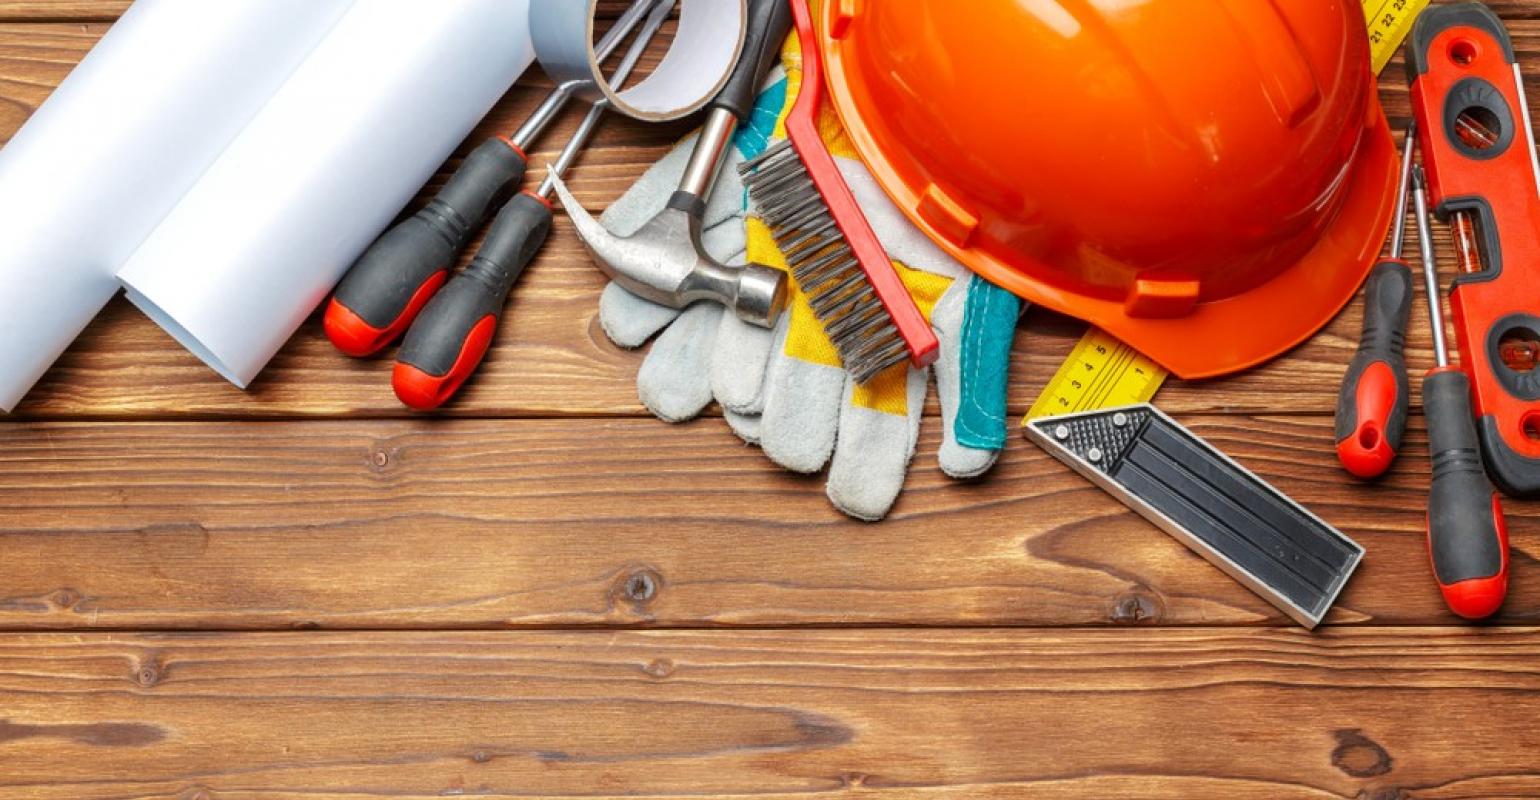 handy tools for renovation or construction